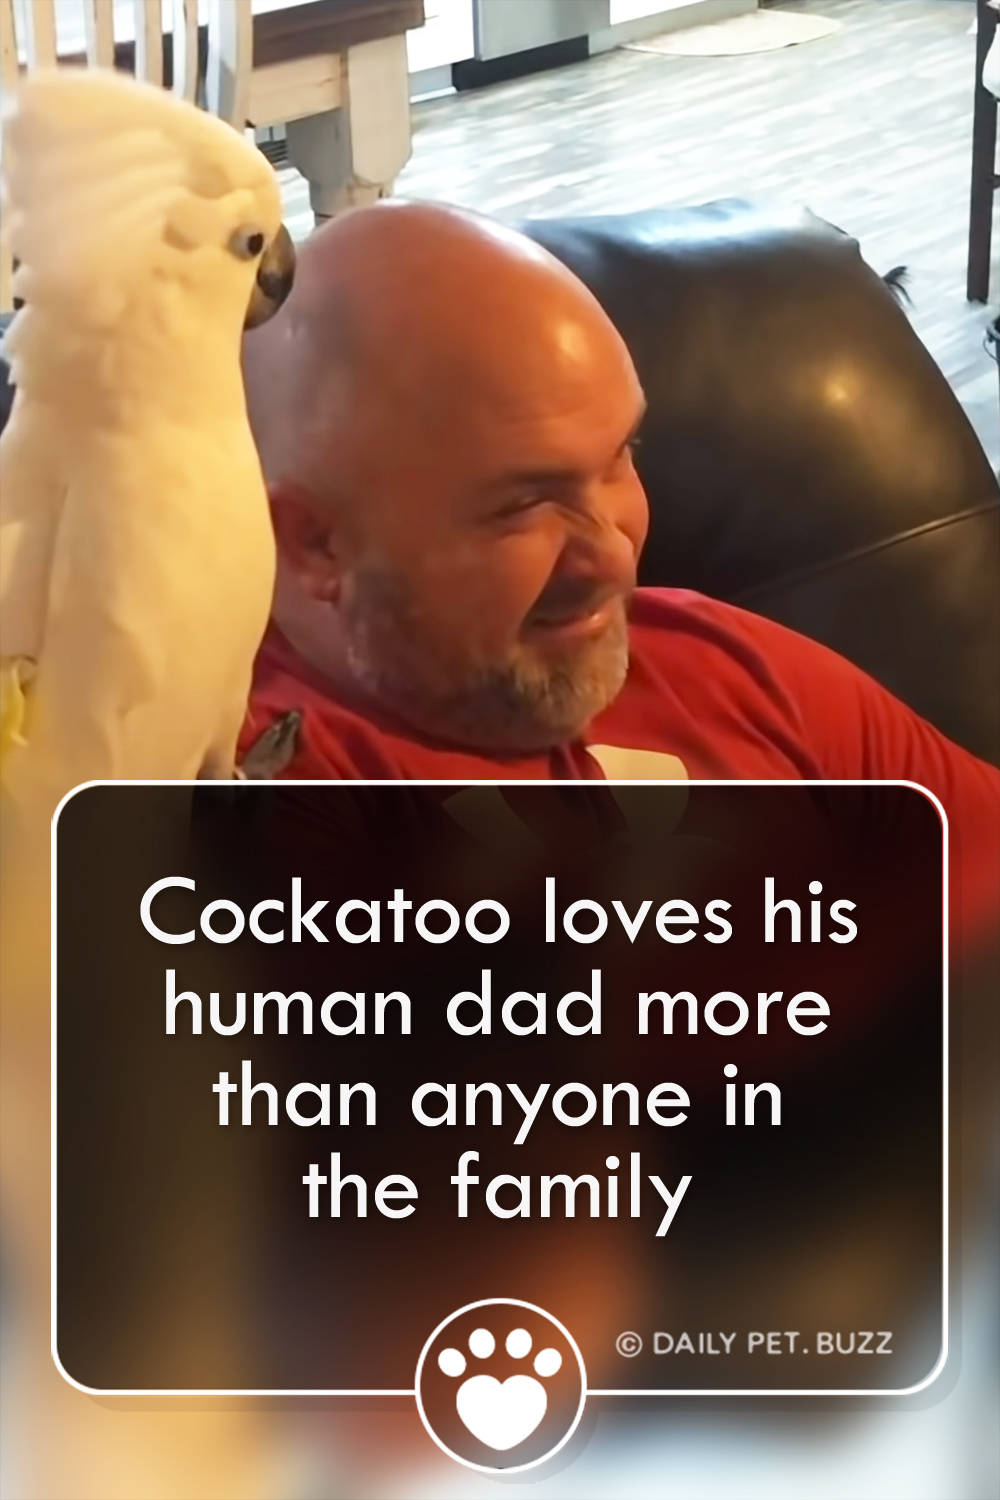 Cockatoo loves his human dad more than anyone in the family